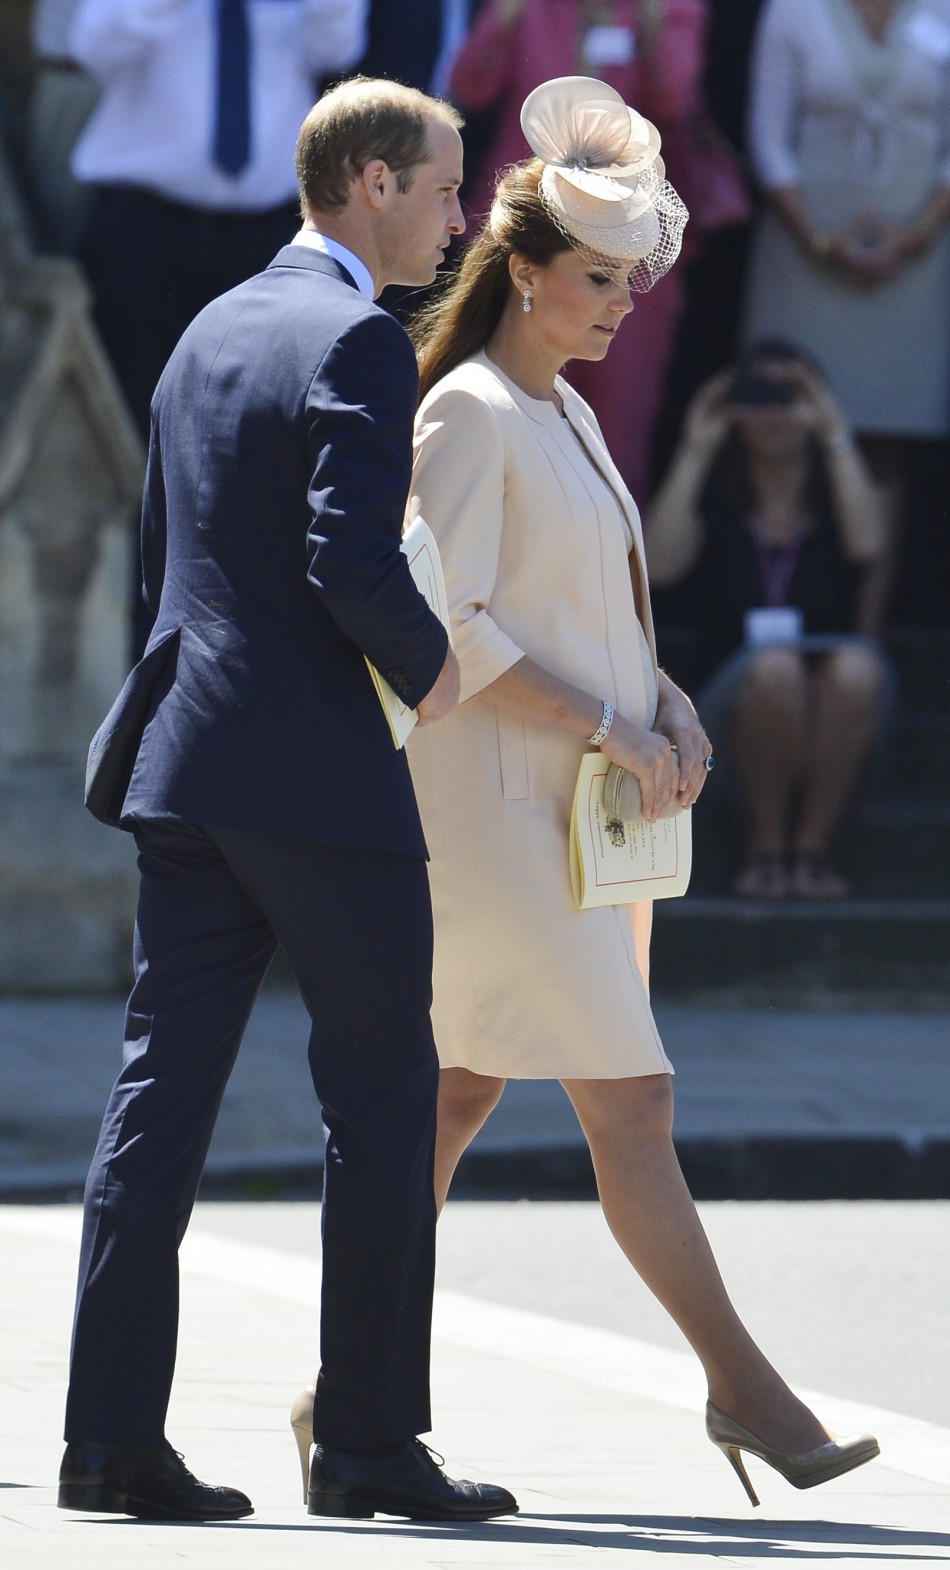 Prince William L and Catherine, Duchess of Cambridge depart Westminster Abbey after celebrating the 60th anniversary of Queen Elizabeths coronation in London June 4, 2013.